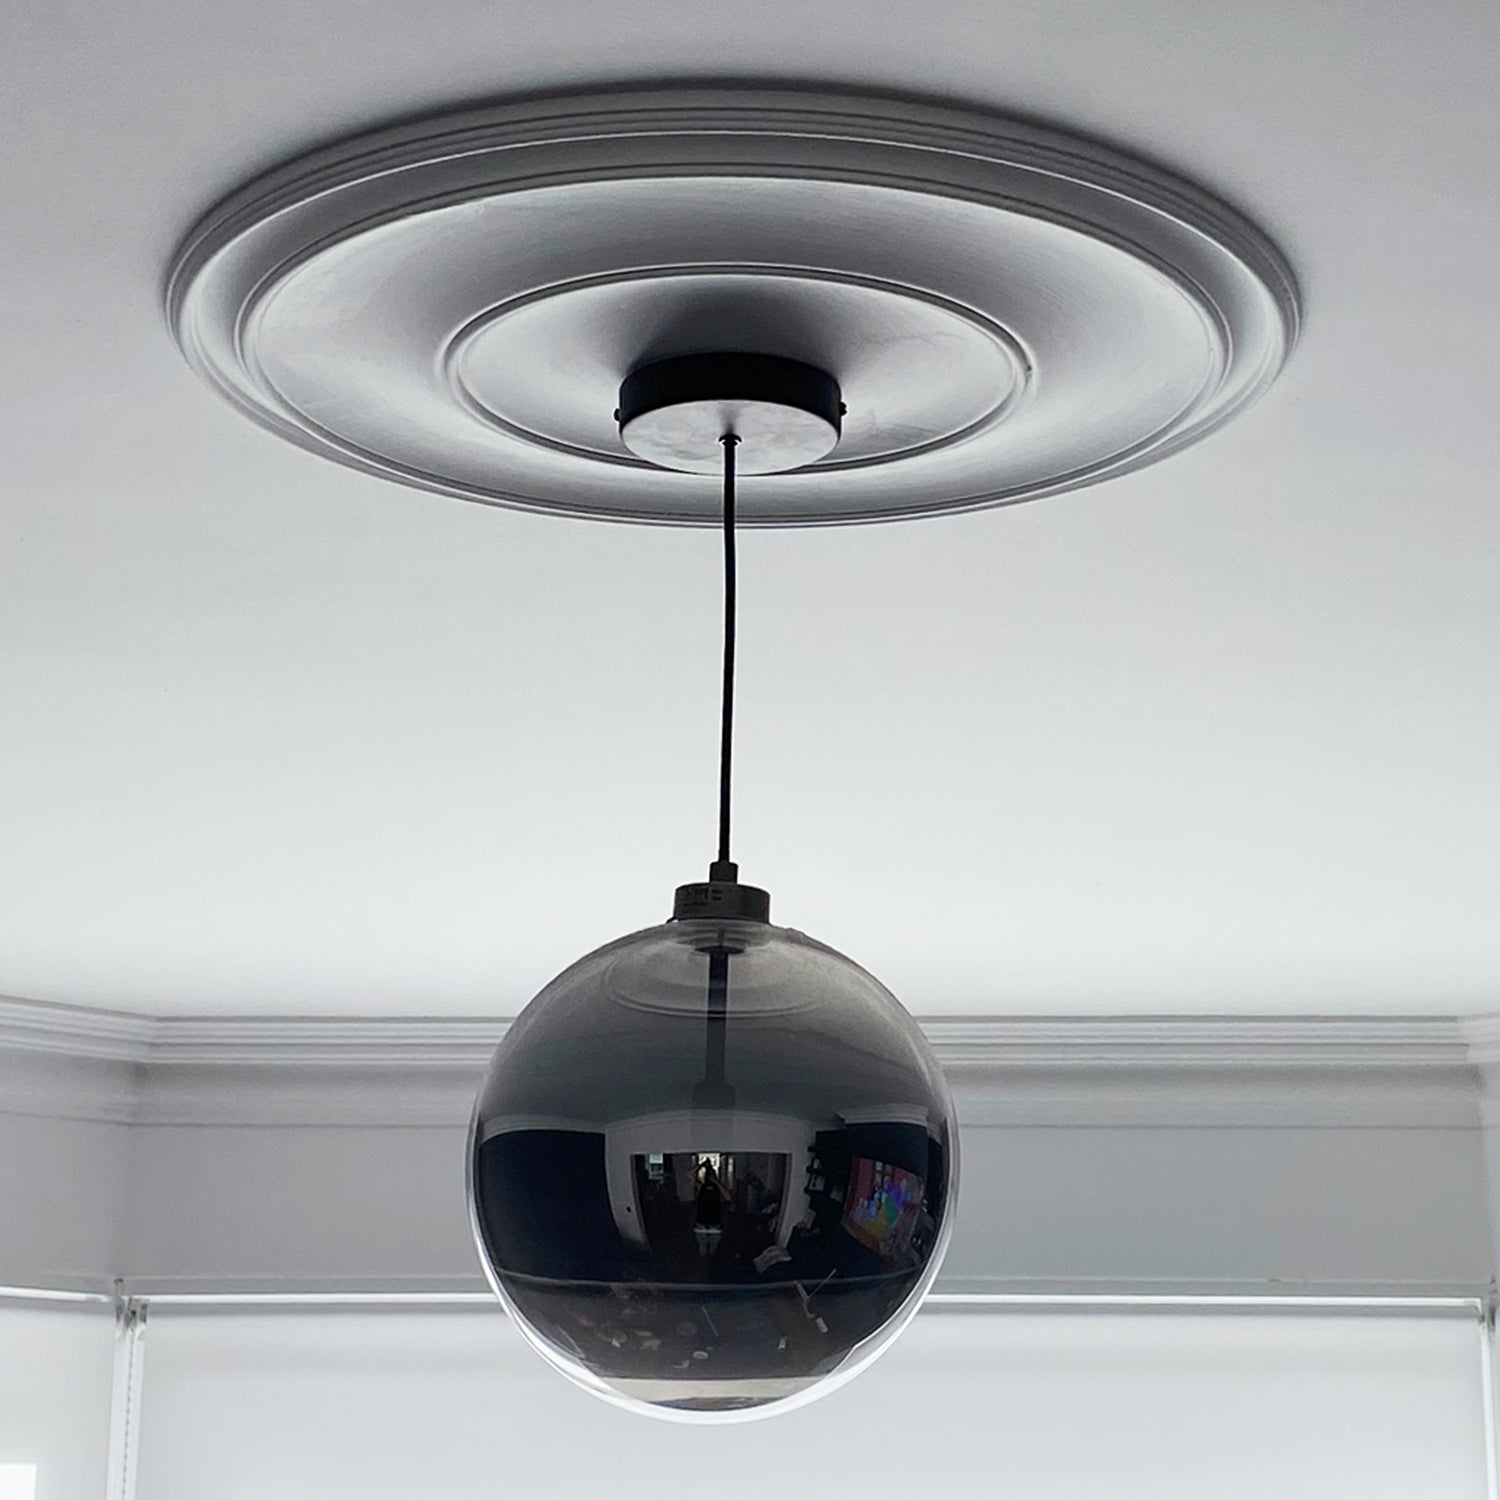 Victorian Ceiling Roses